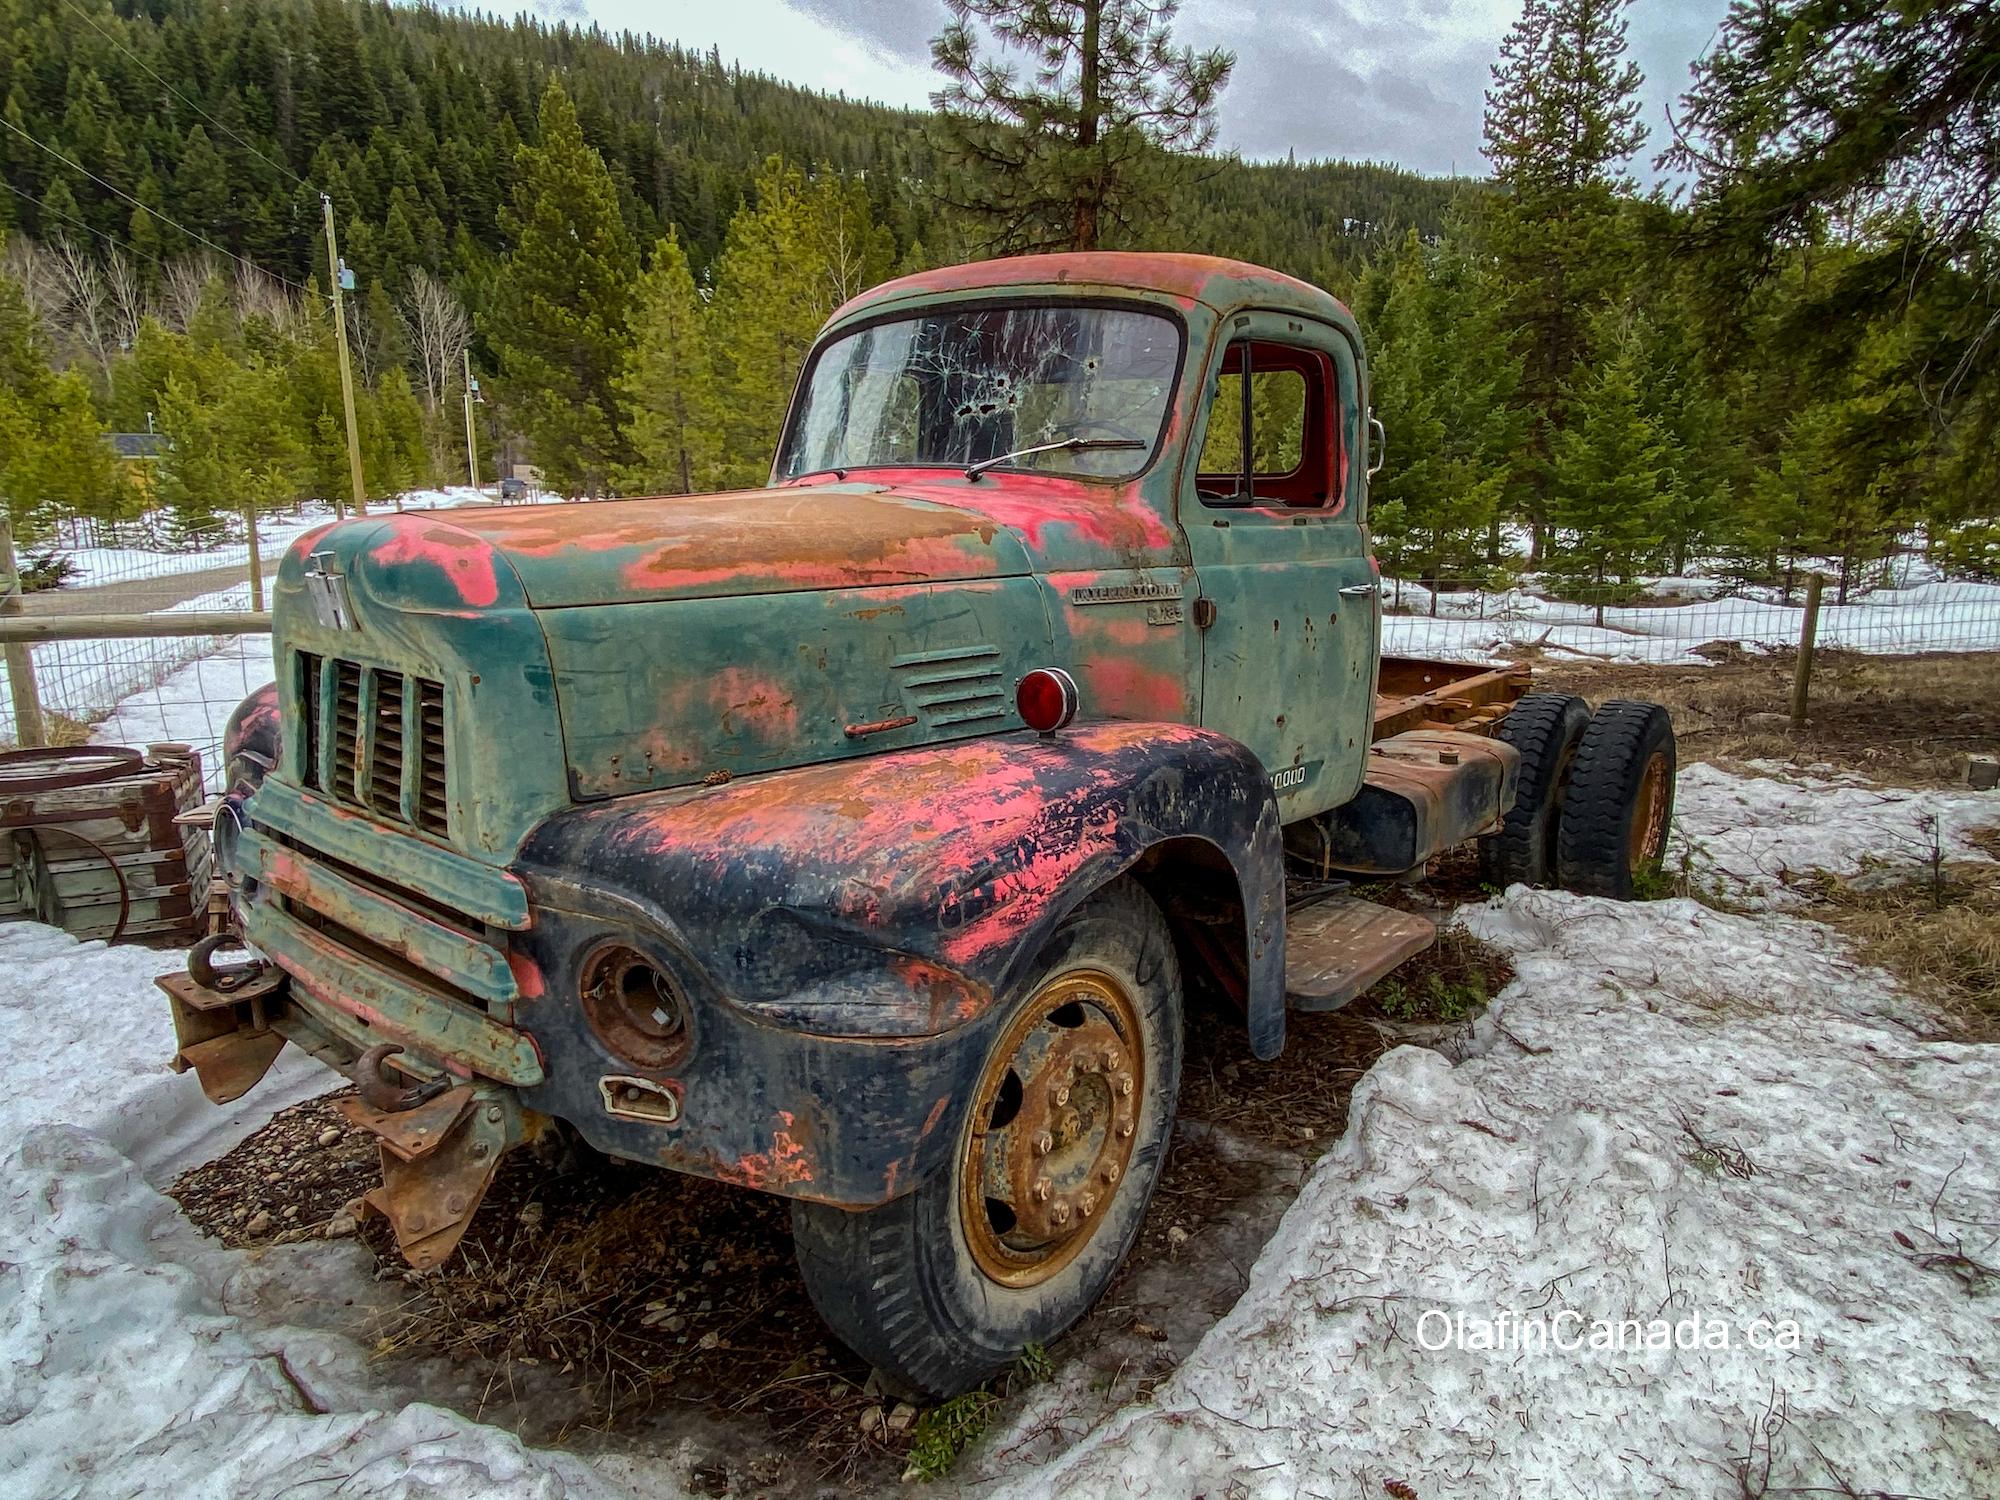 Old truck on the Summerland Princeton Road near Bankeir #olafincanada #britishcolumbia #discoverbc #abandoned #truck